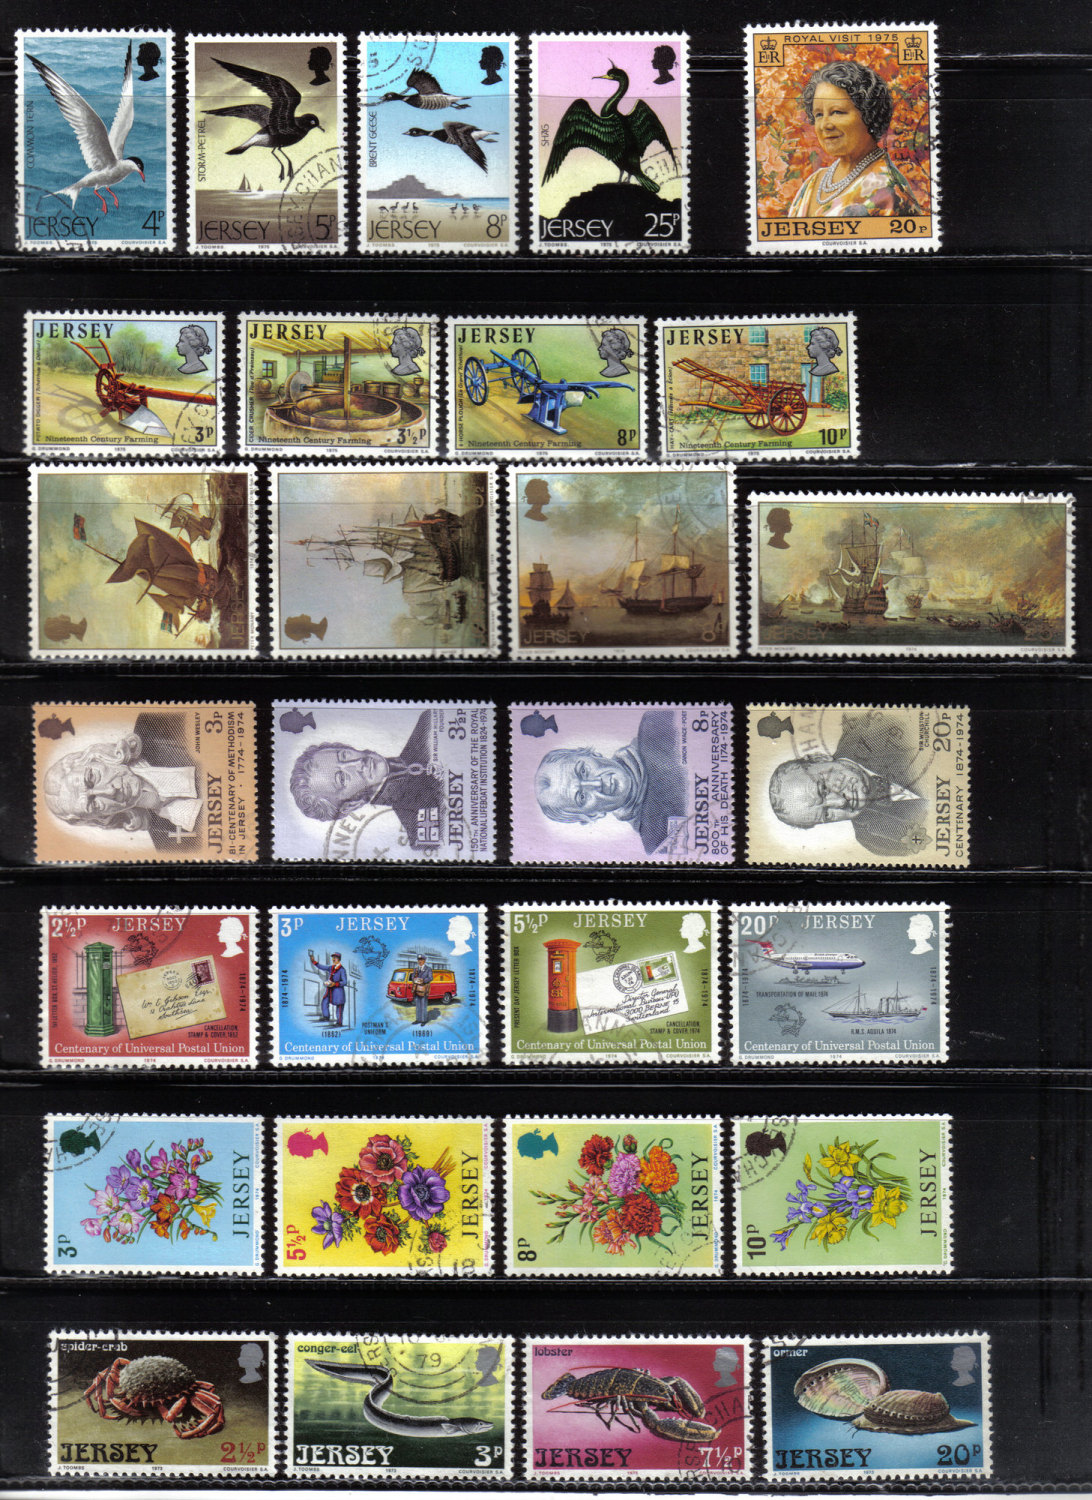 Jersey Stamps 8 Full Sets - USED (z557)